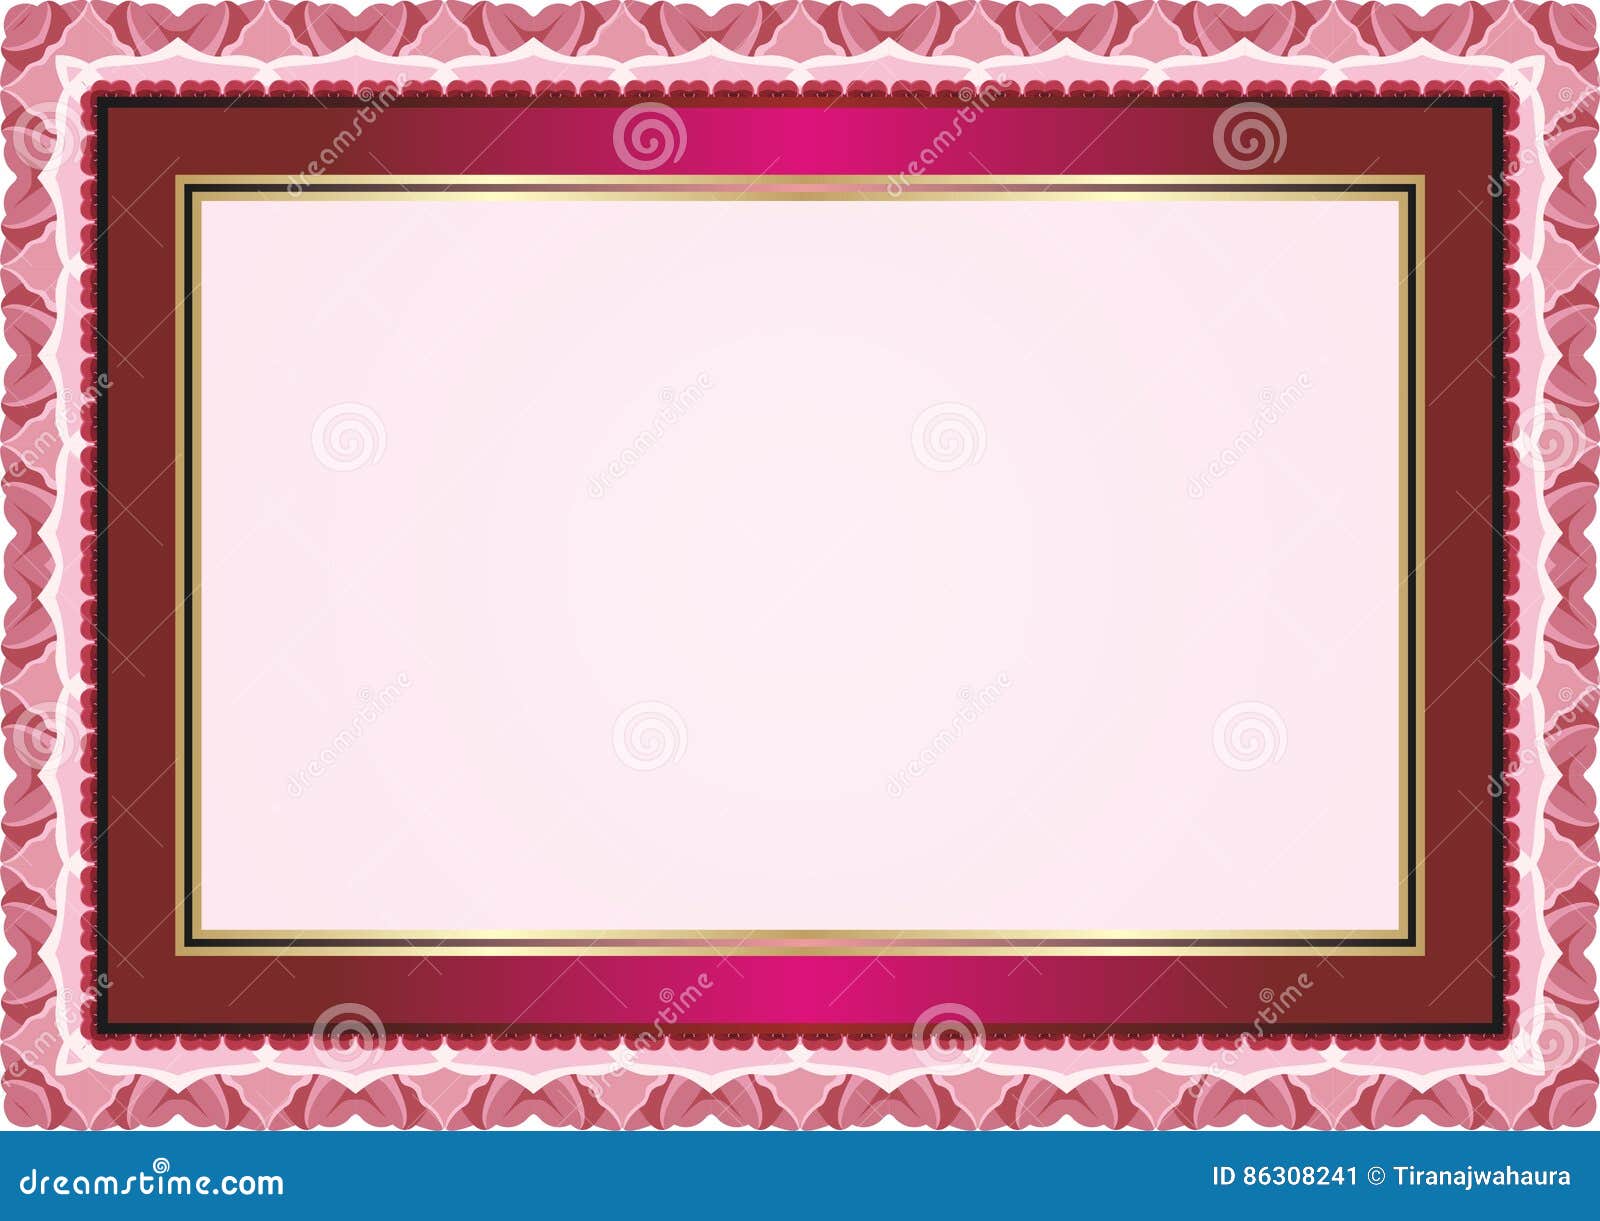 Frame - Border With Bright Color Style Design Stock Vector ...
 Color Borders Design